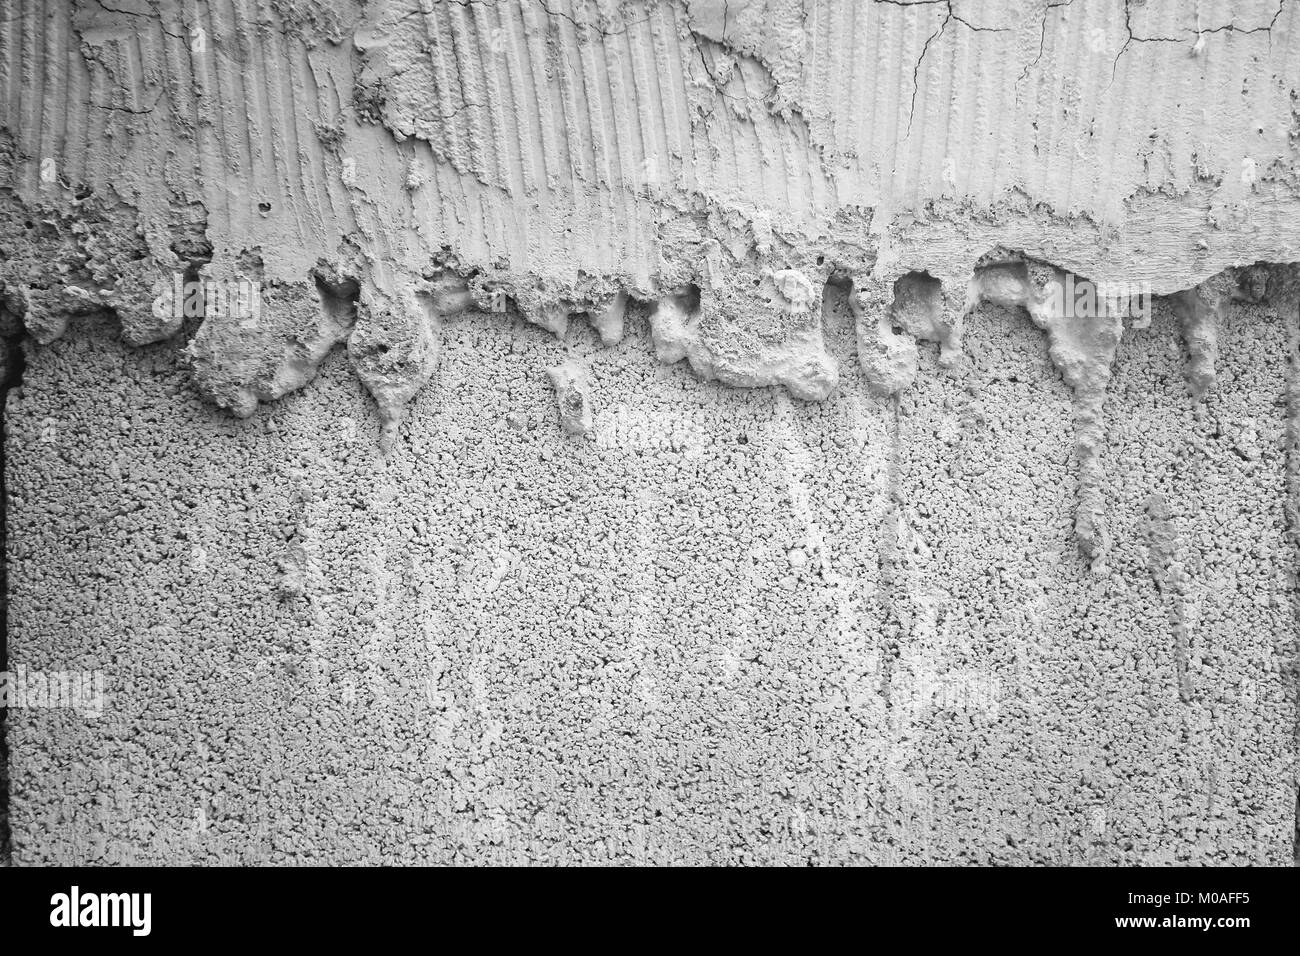 Concrete surface with striped relief. Stock Photo